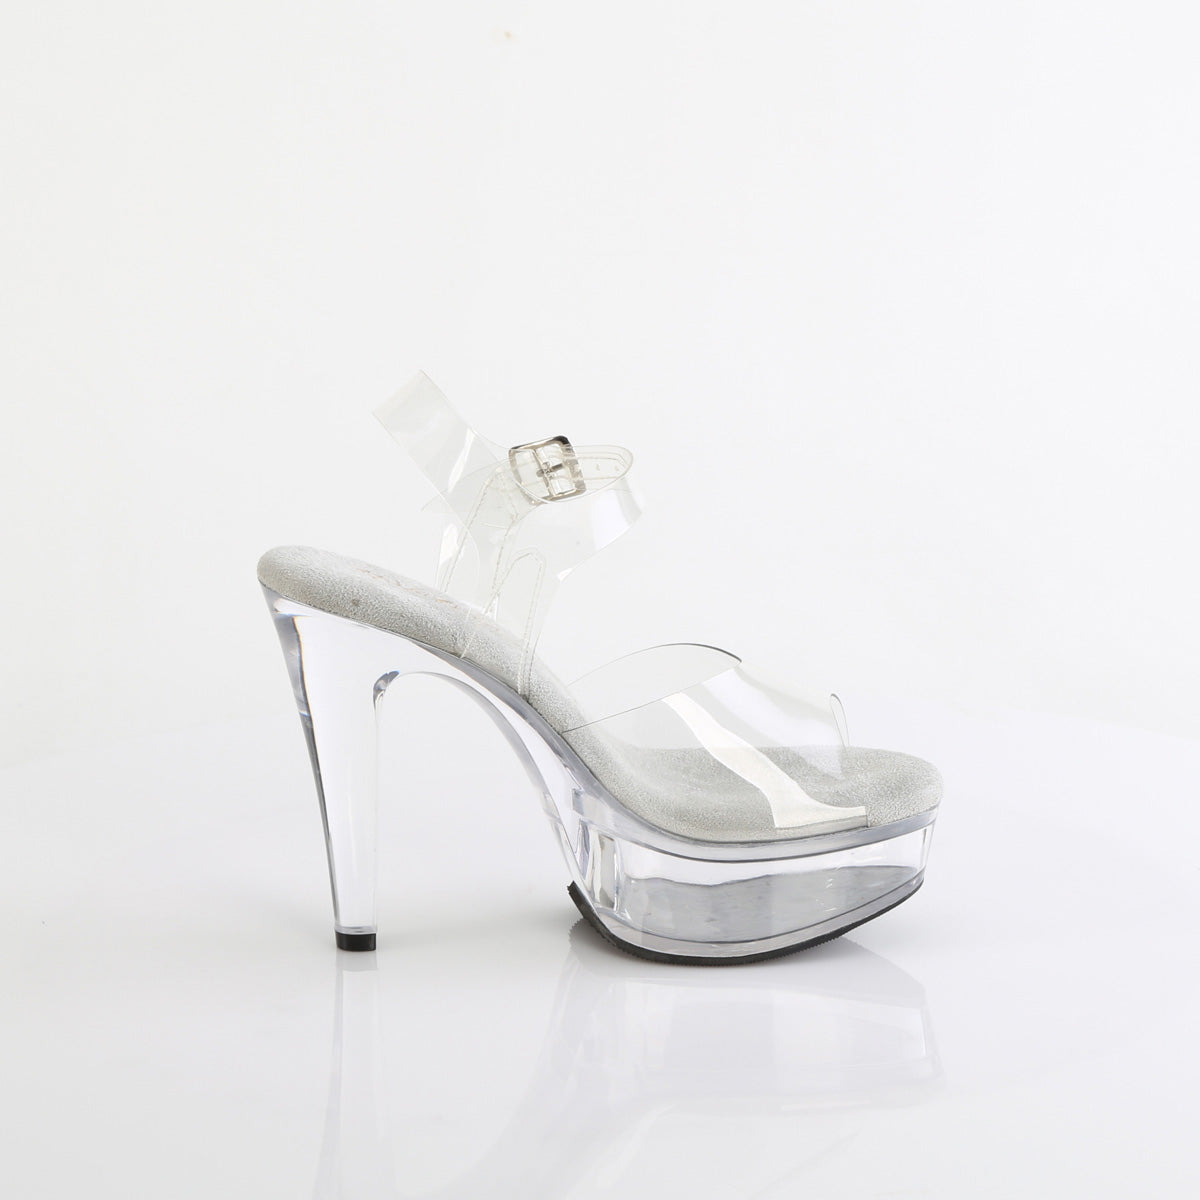 MARTINI-508 Fabulicious Transparent Pole Dancing Shoes with Clear Straps.